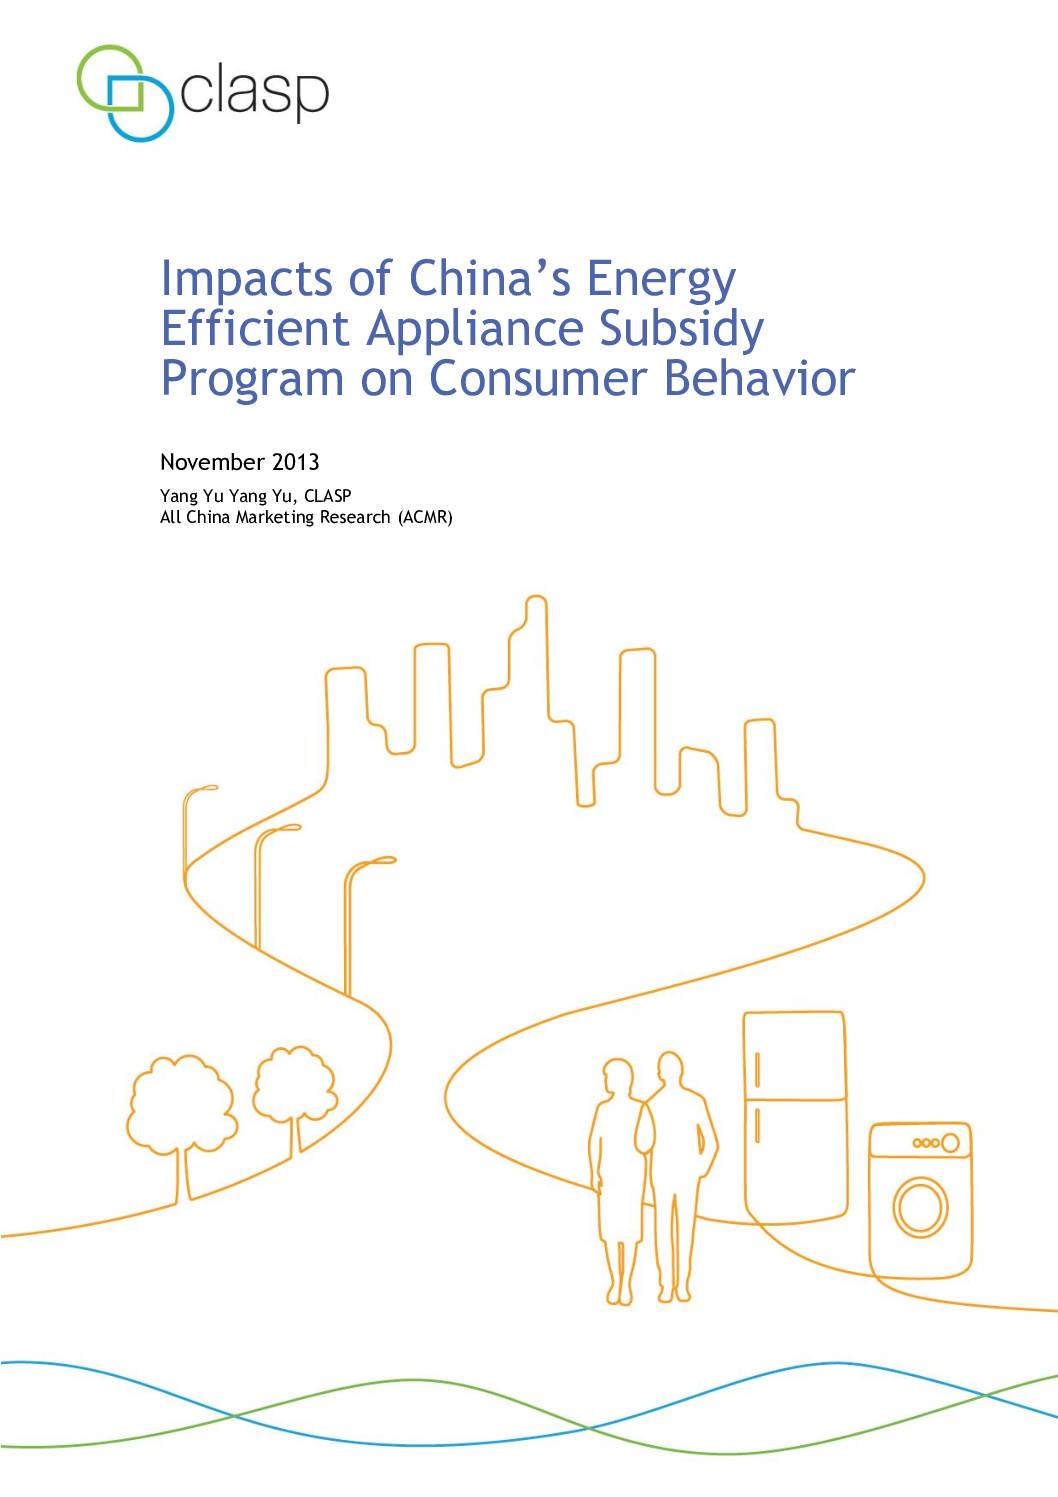 Impacts of China’s Energy Efficient Appliance Subsidy Program on Consumer Behavior